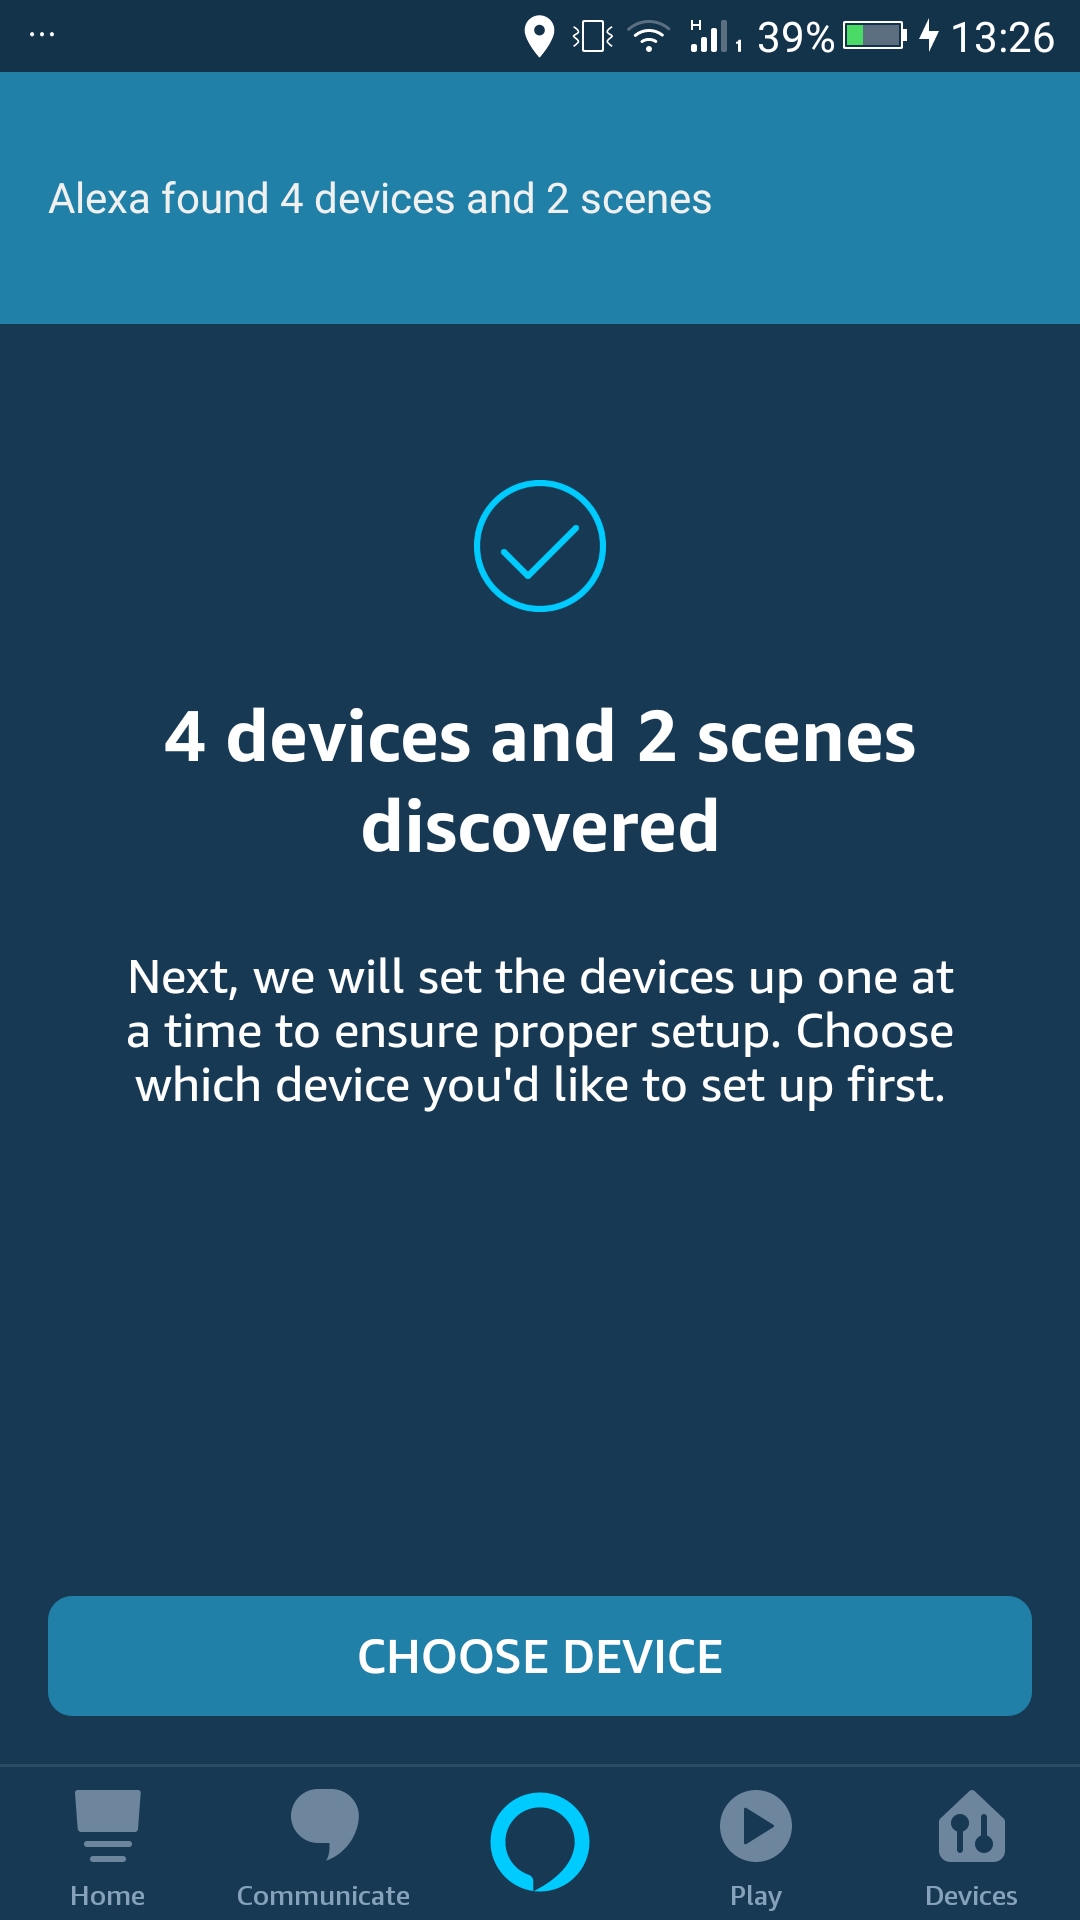 devices-discovered.jpg